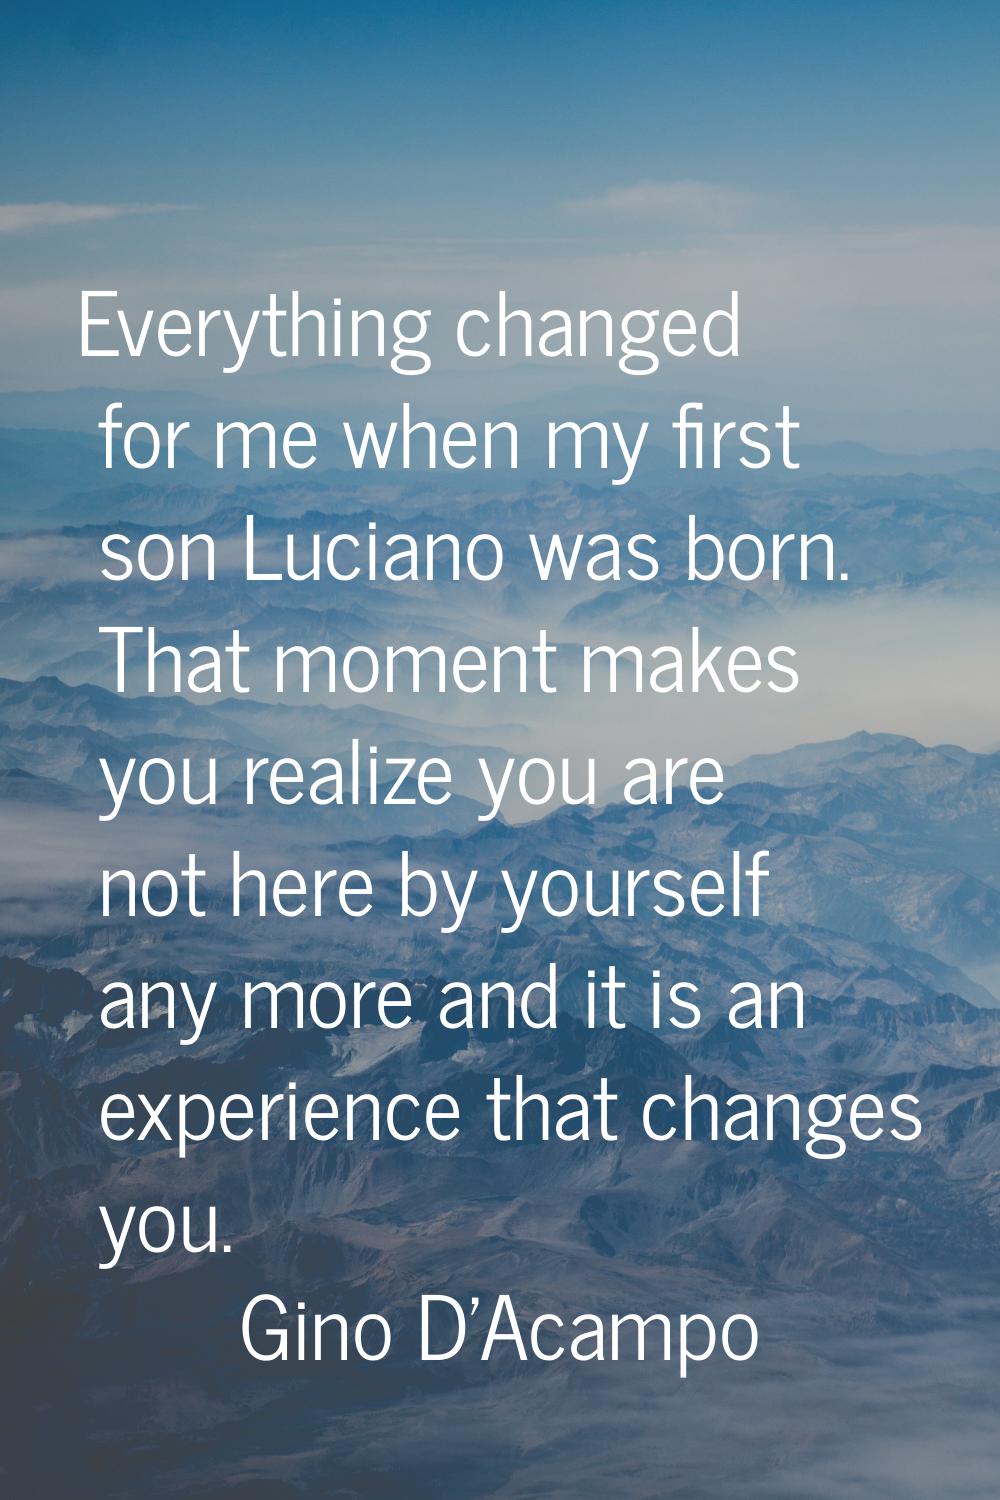 Everything changed for me when my first son Luciano was born. That moment makes you realize you are